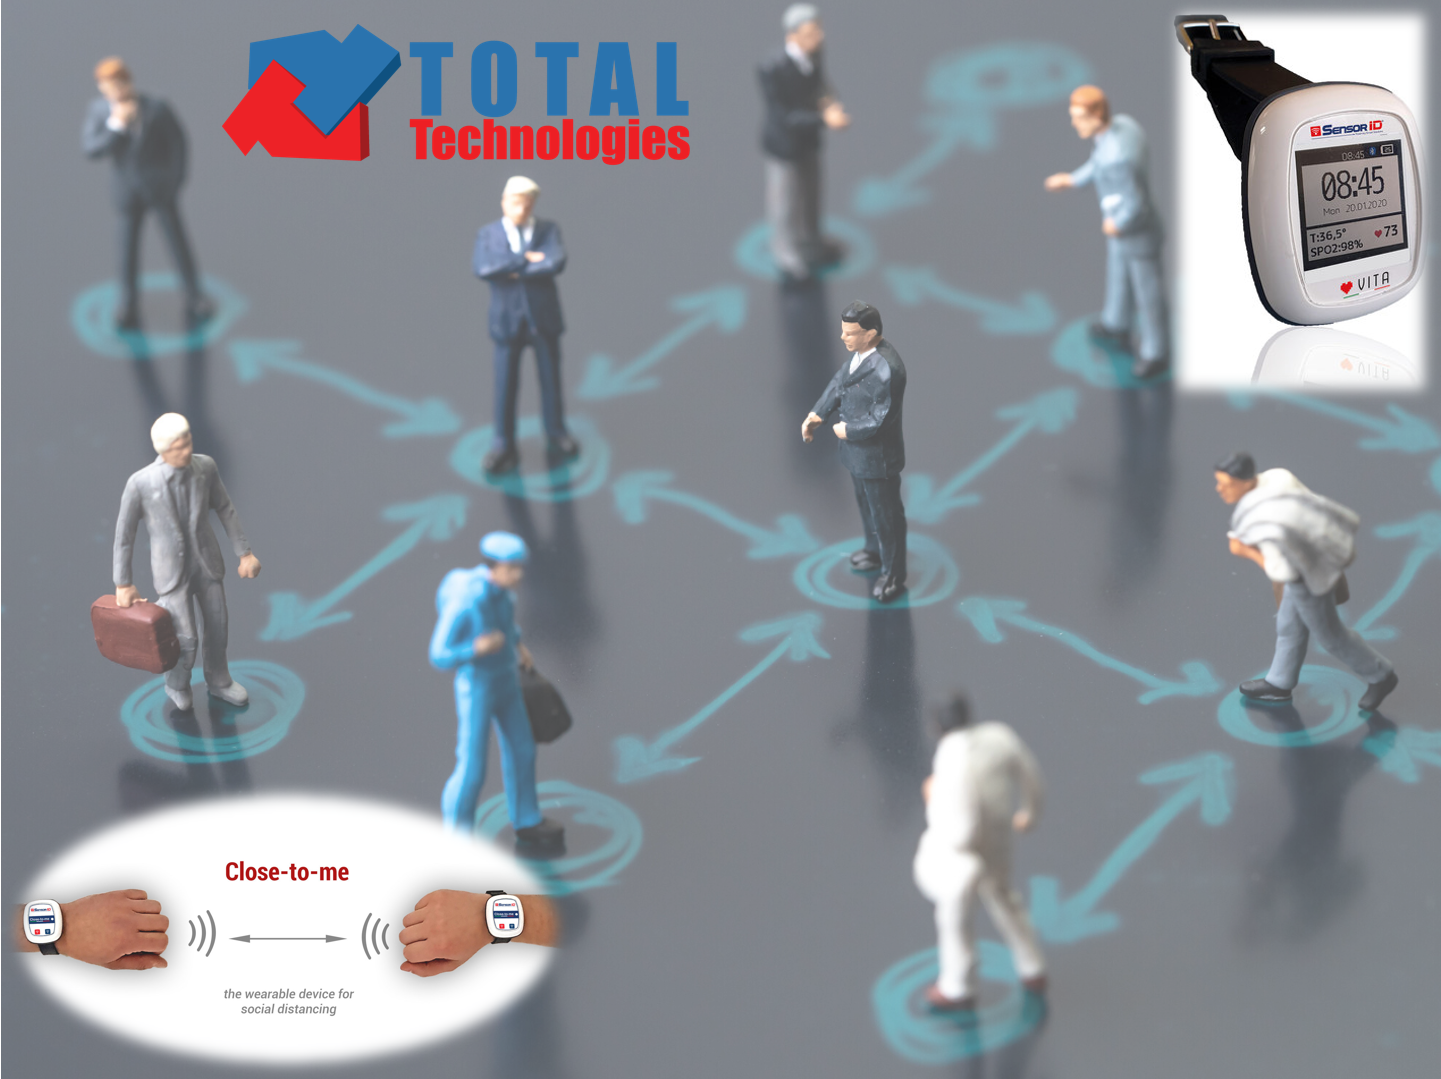 Total Technologies<sup>®</sup> supports social distancing and healthcare with the 